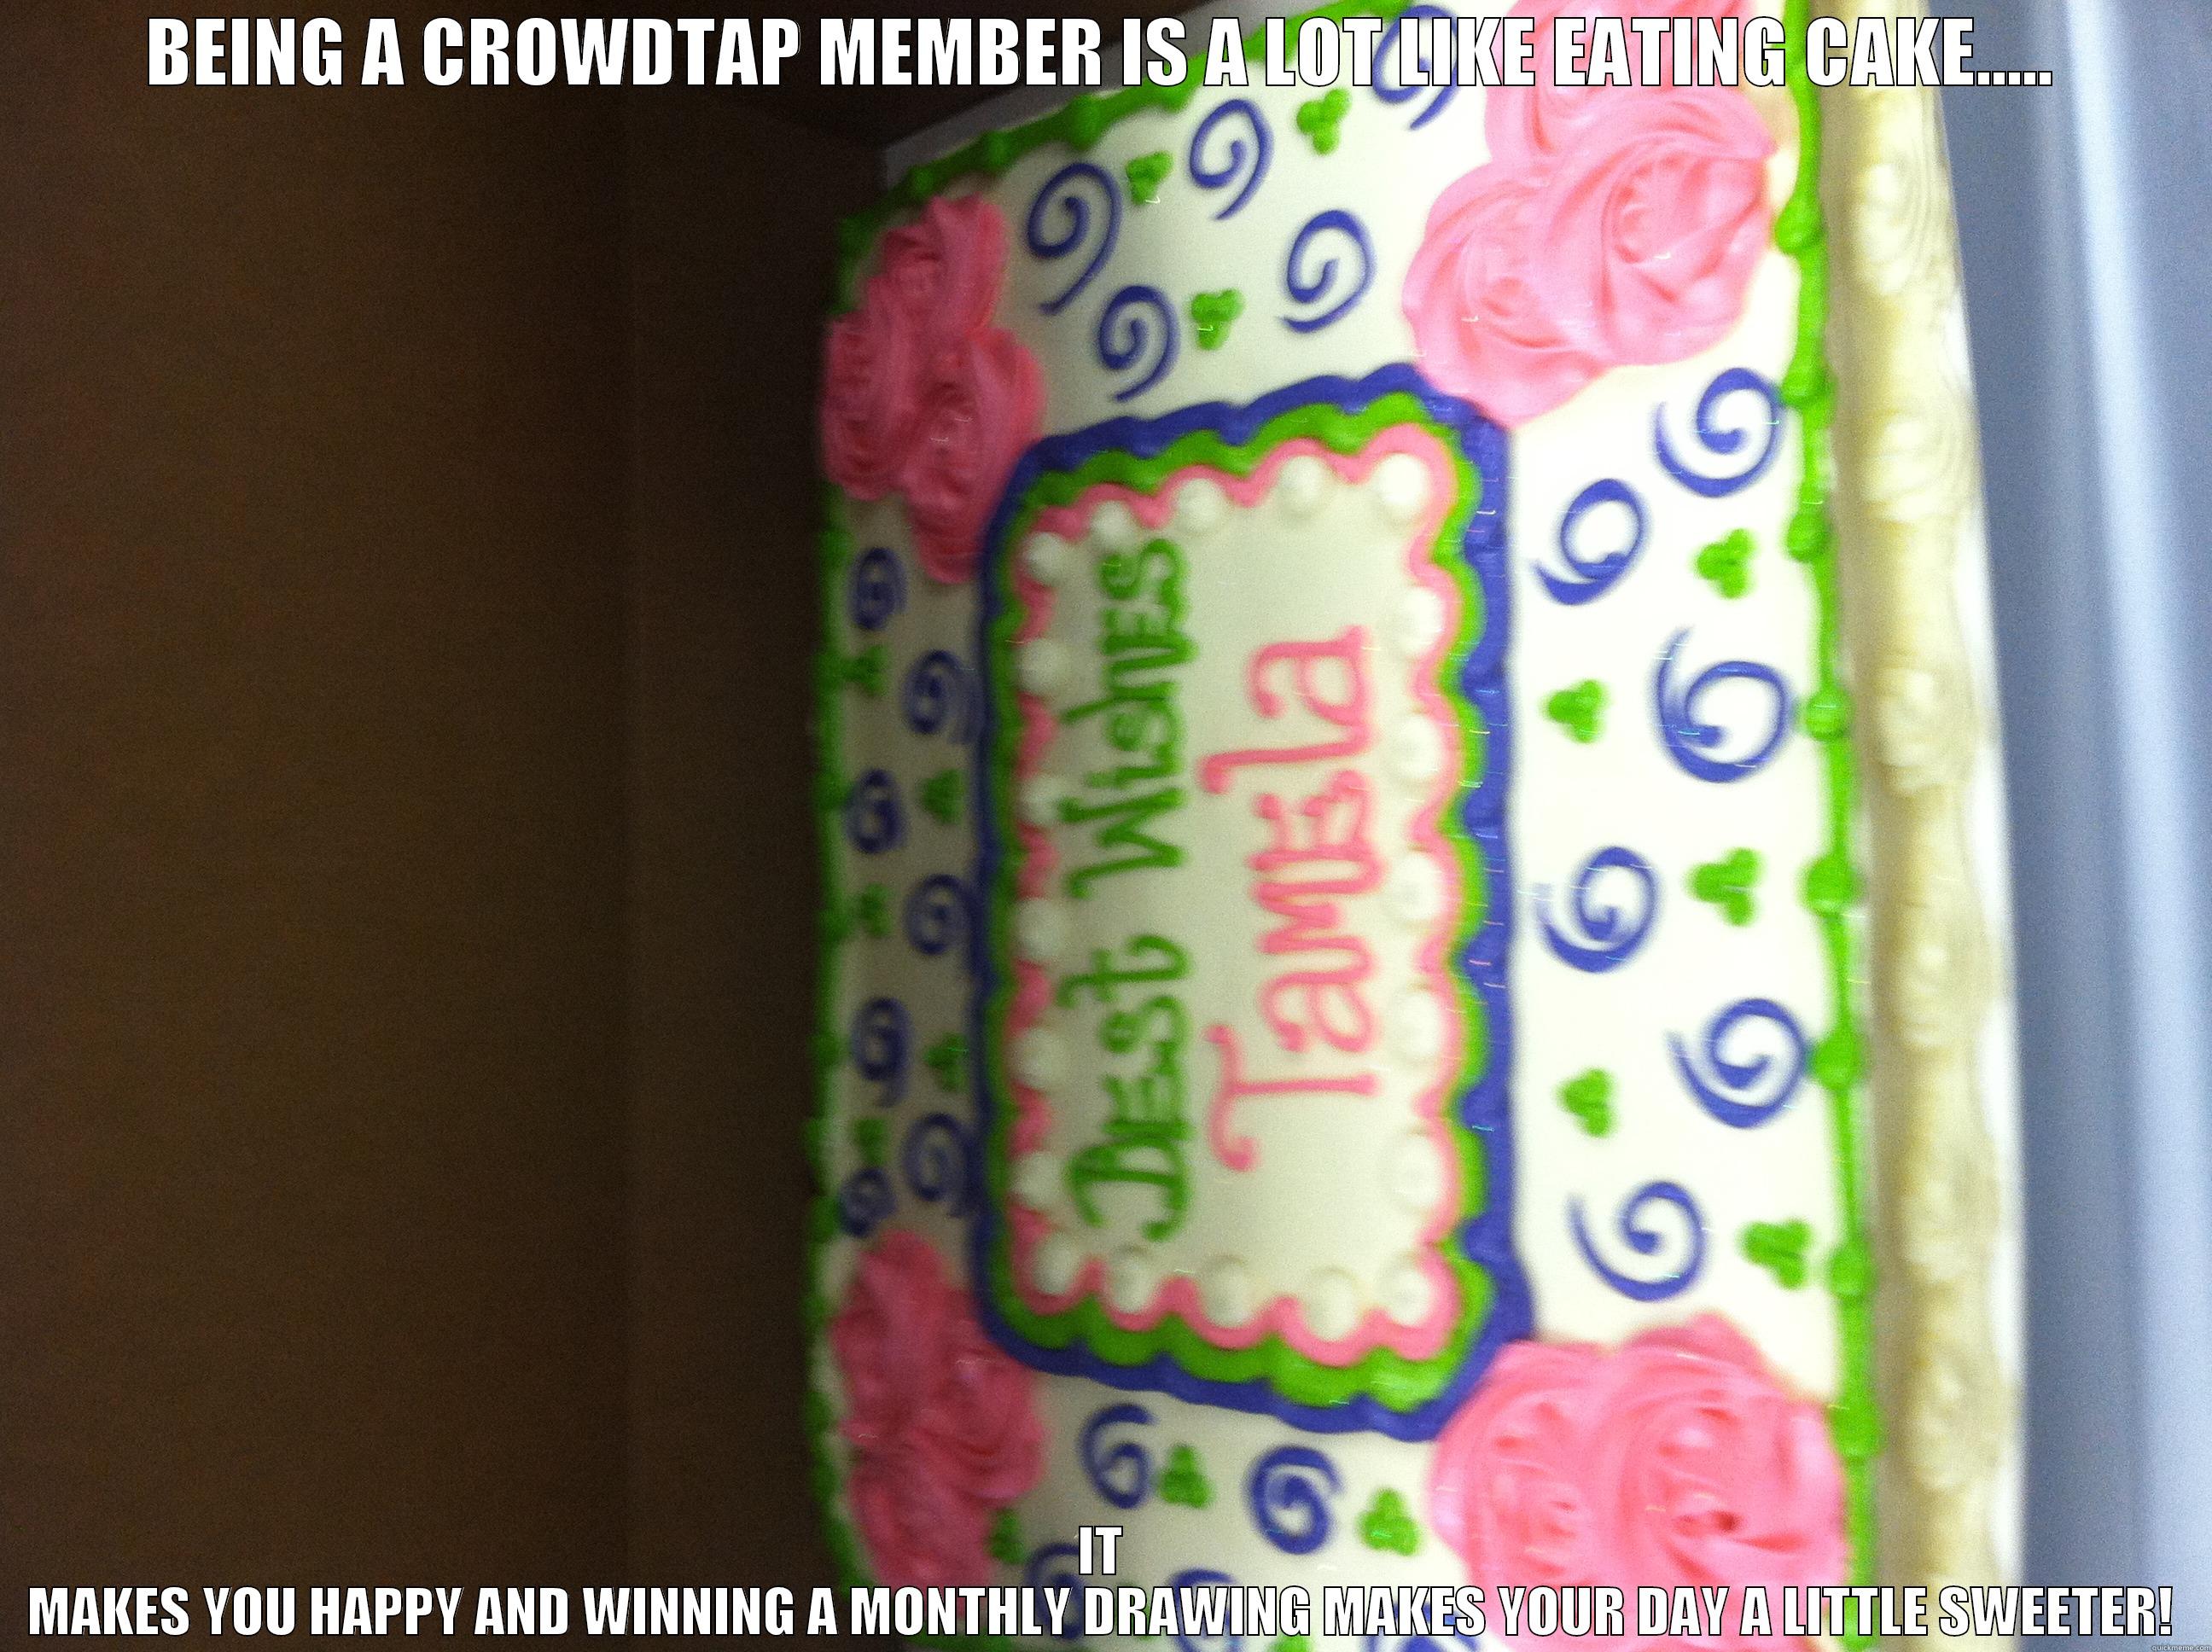 CROWDTAP MEMBER HAPPINESS -  BEING A CROWDTAP MEMBER IS A LOT LIKE EATING CAKE.....  IT MAKES YOU HAPPY AND WINNING A MONTHLY DRAWING MAKES YOUR DAY A LITTLE SWEETER! Misc